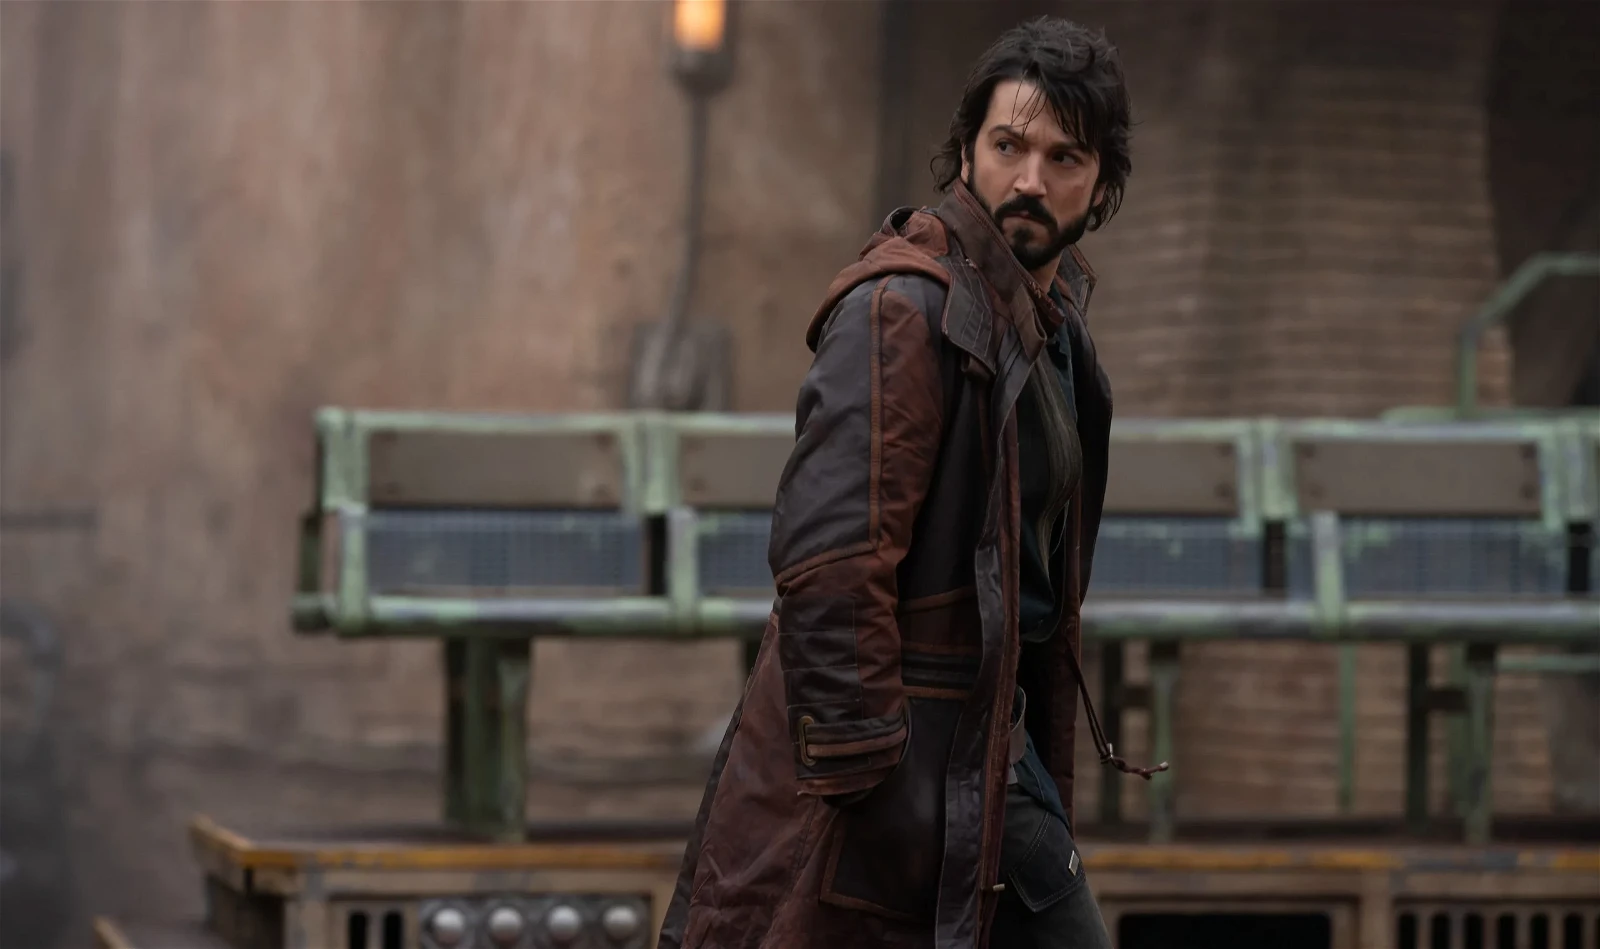 Diego Luna as Cassian Andor in the Star Wars universe.